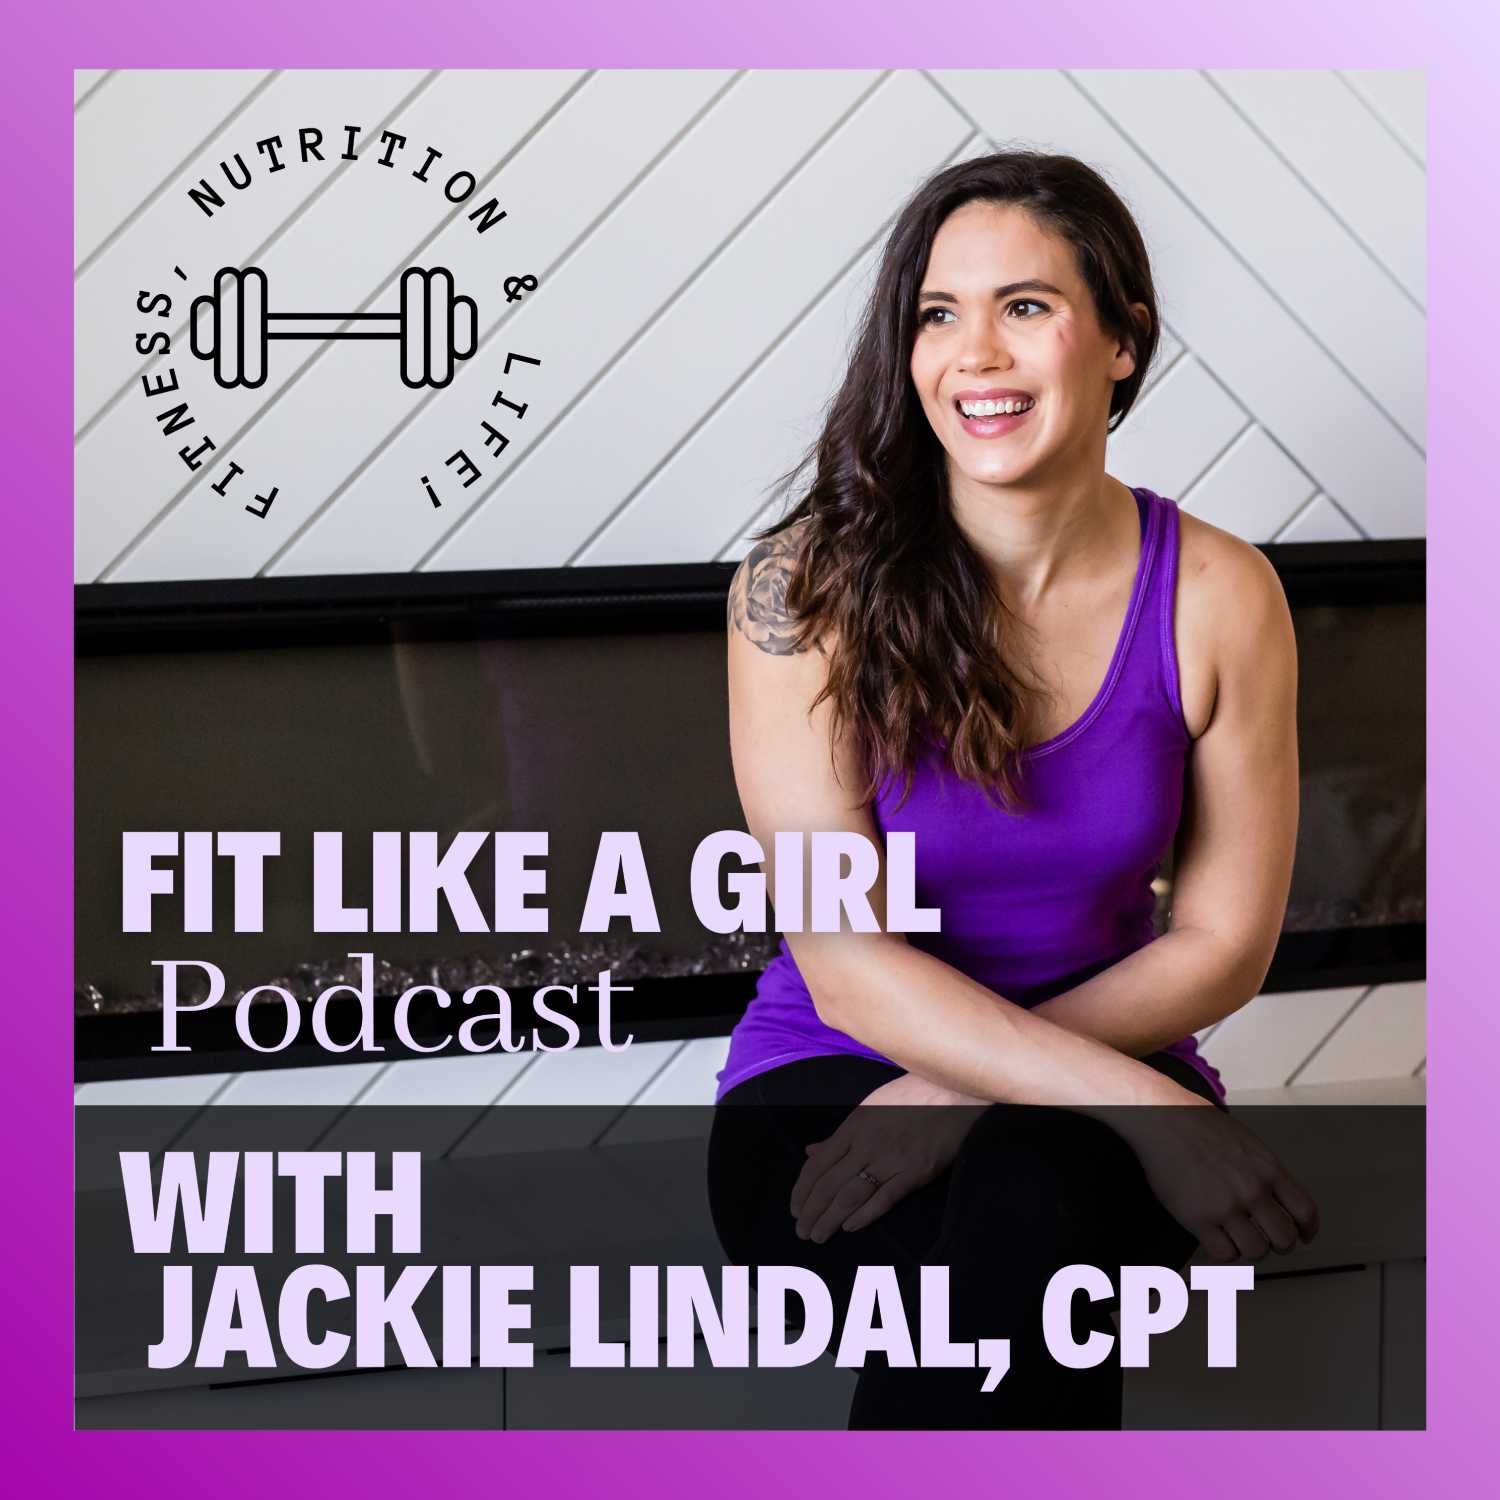 Episode #26: Intuitive Eating, Calories & Macros! What are they and what should you do?